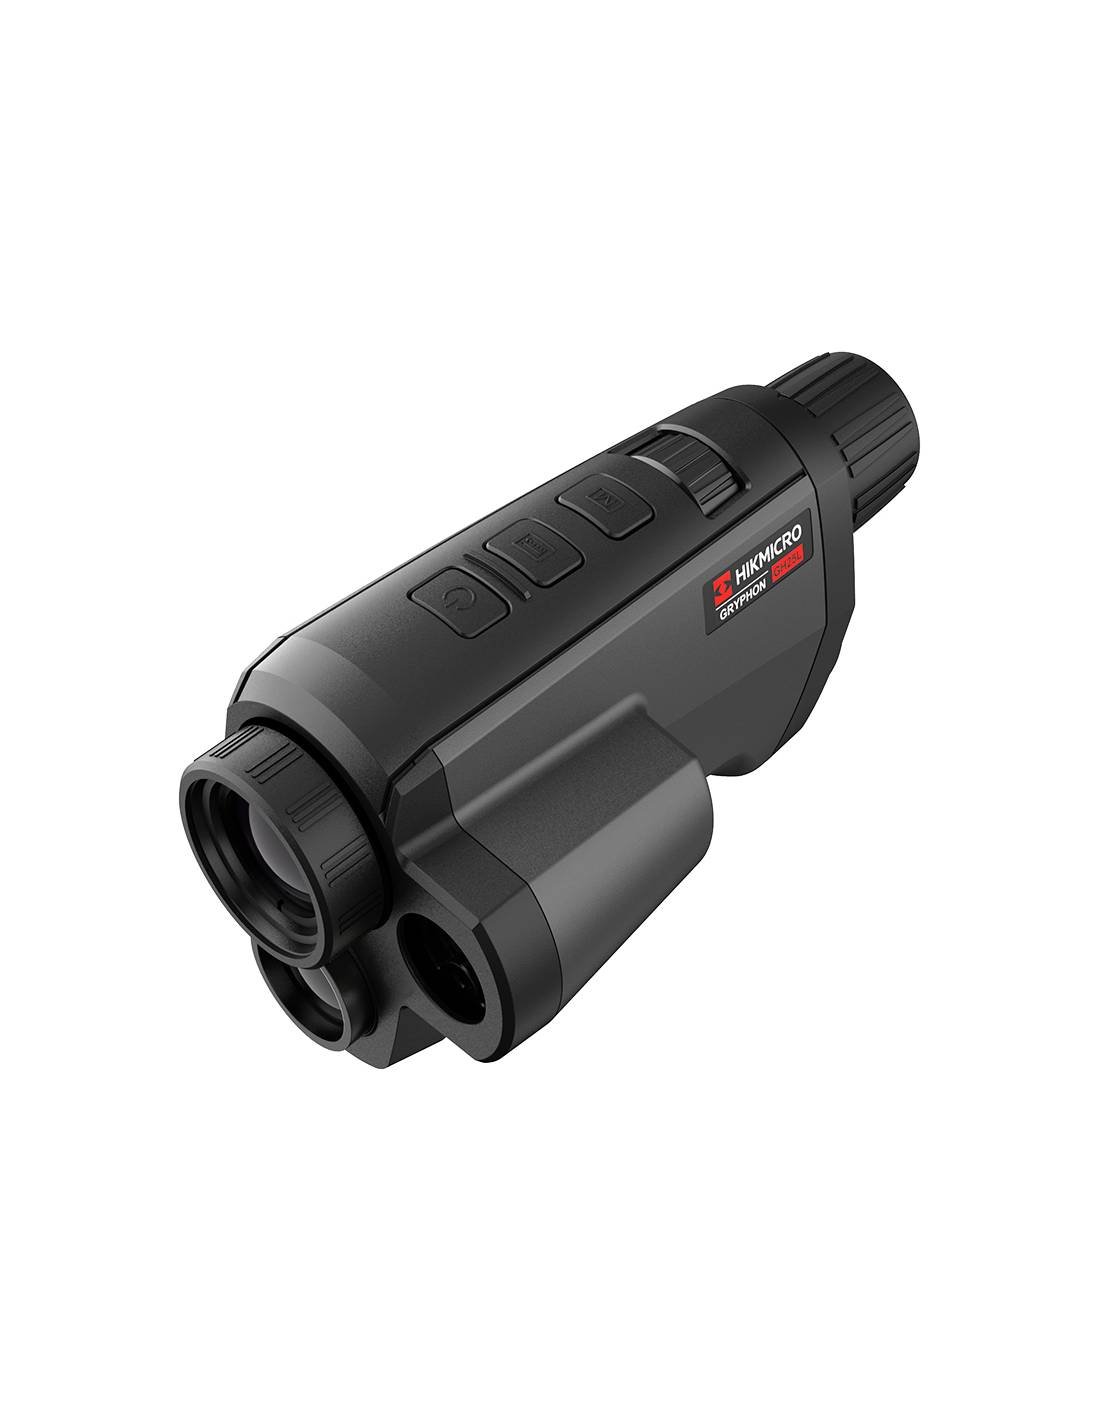 Gryphon Fusion Bispectral Imaging Thermal Monocular